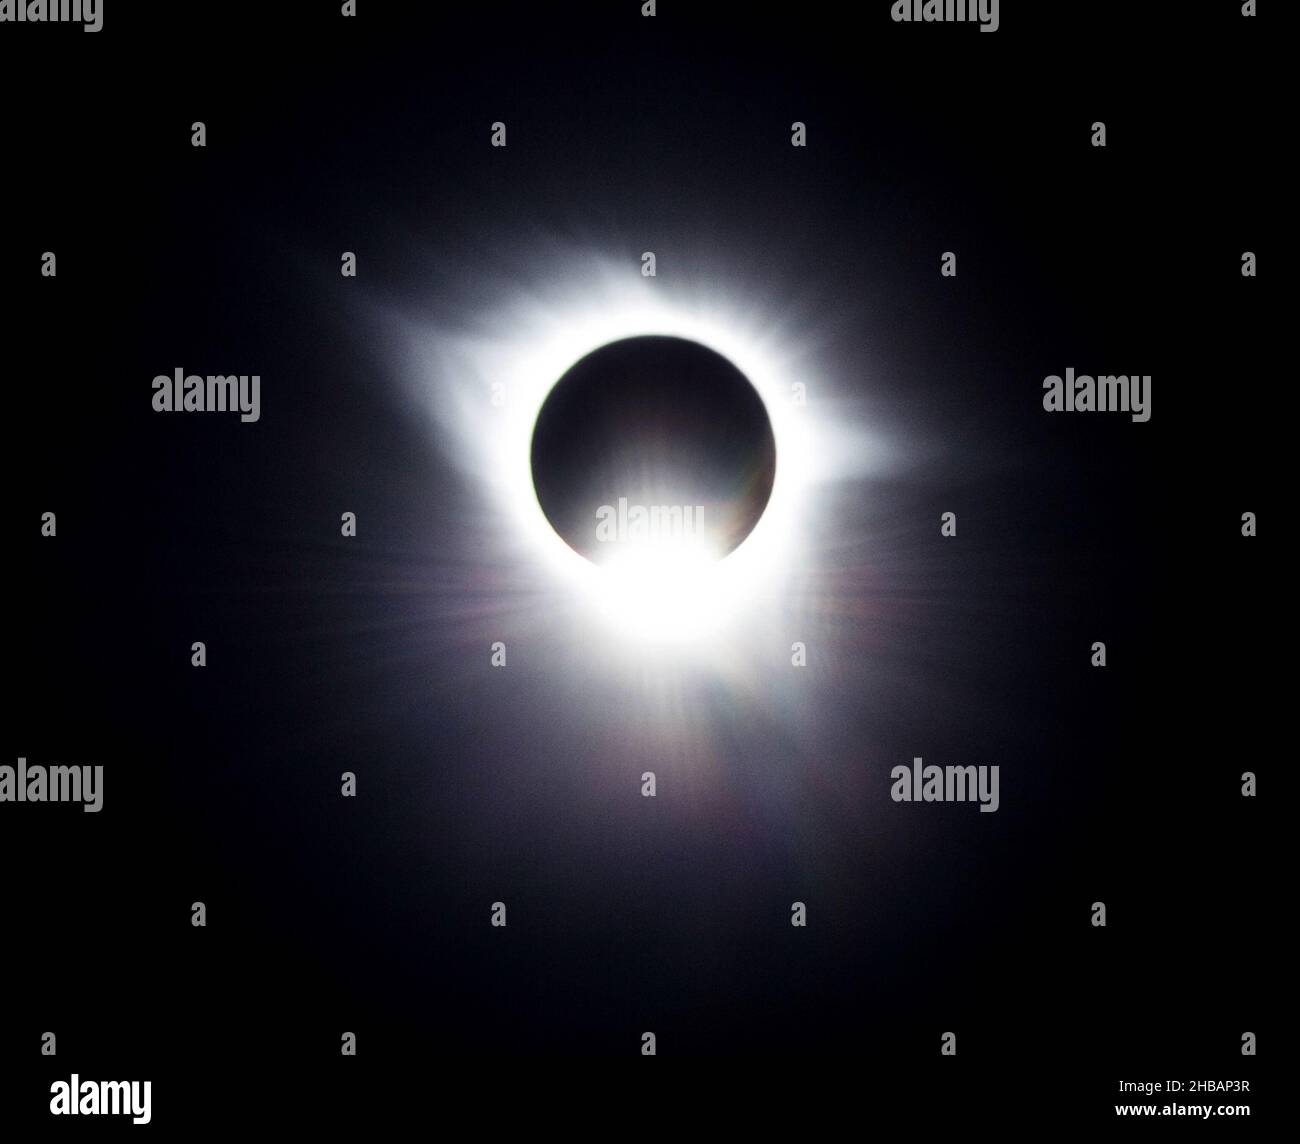 2017 Solar Eclipse Diamond Ring Effect taken at  Scotts Bluff National Monument, Nebraska, USA. The Diamond Ring Effect occurs just before/after otality as the sun peeks around the moon. The effect is also called Bailey's Beads. A unique, optimised version of an NPS image, Credit: NPS/B. Poffenberger Stock Photo